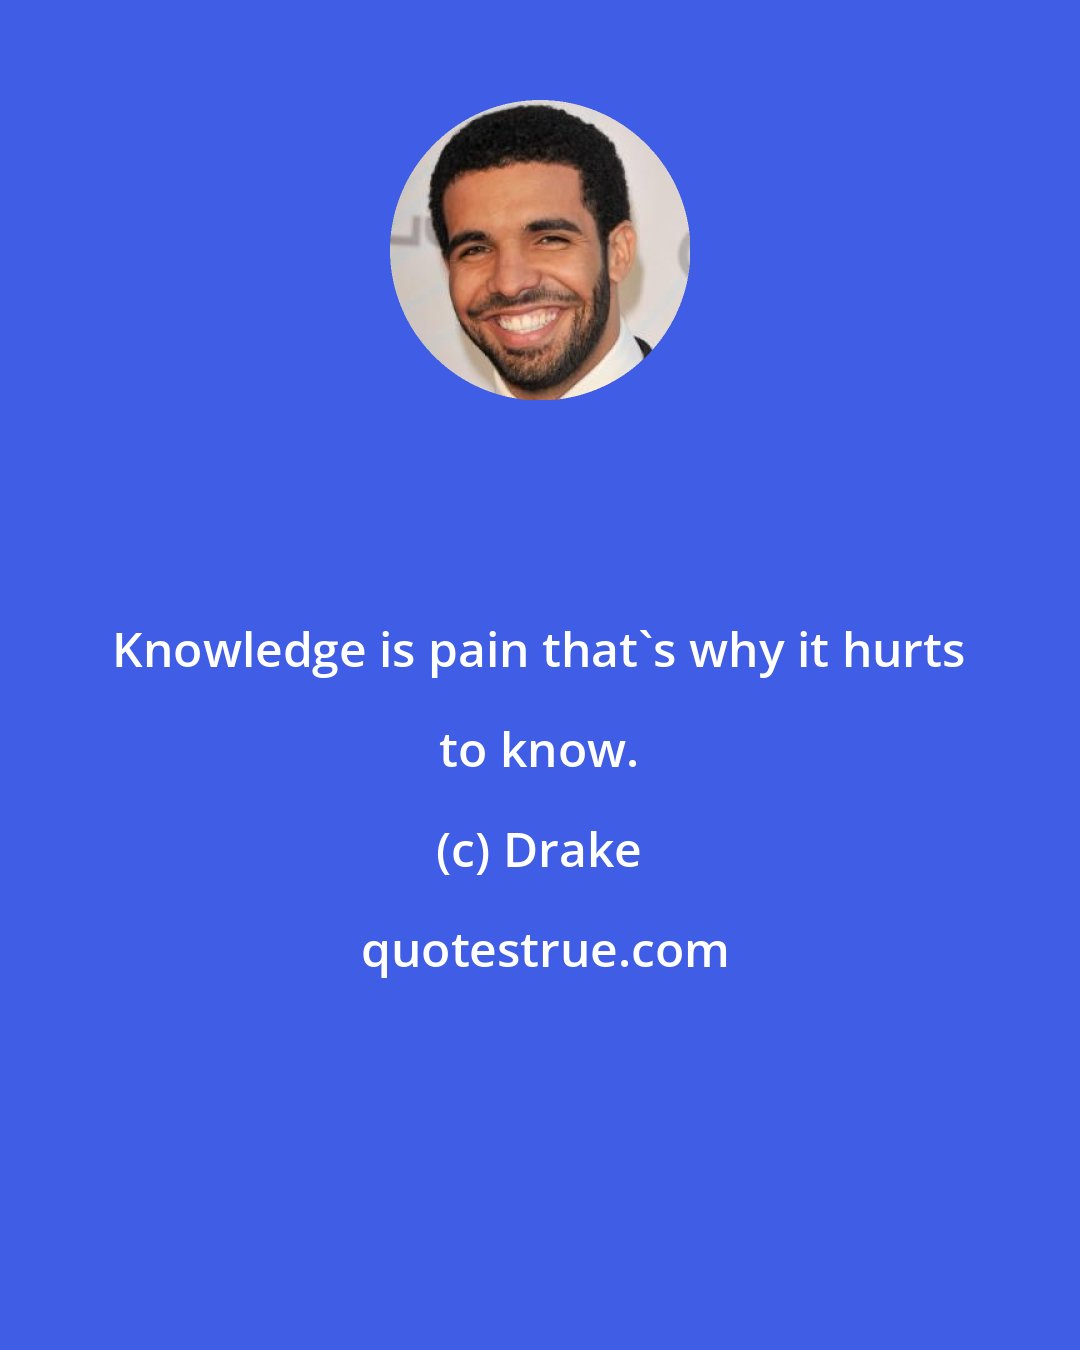 Drake: Knowledge is pain that's why it hurts to know.